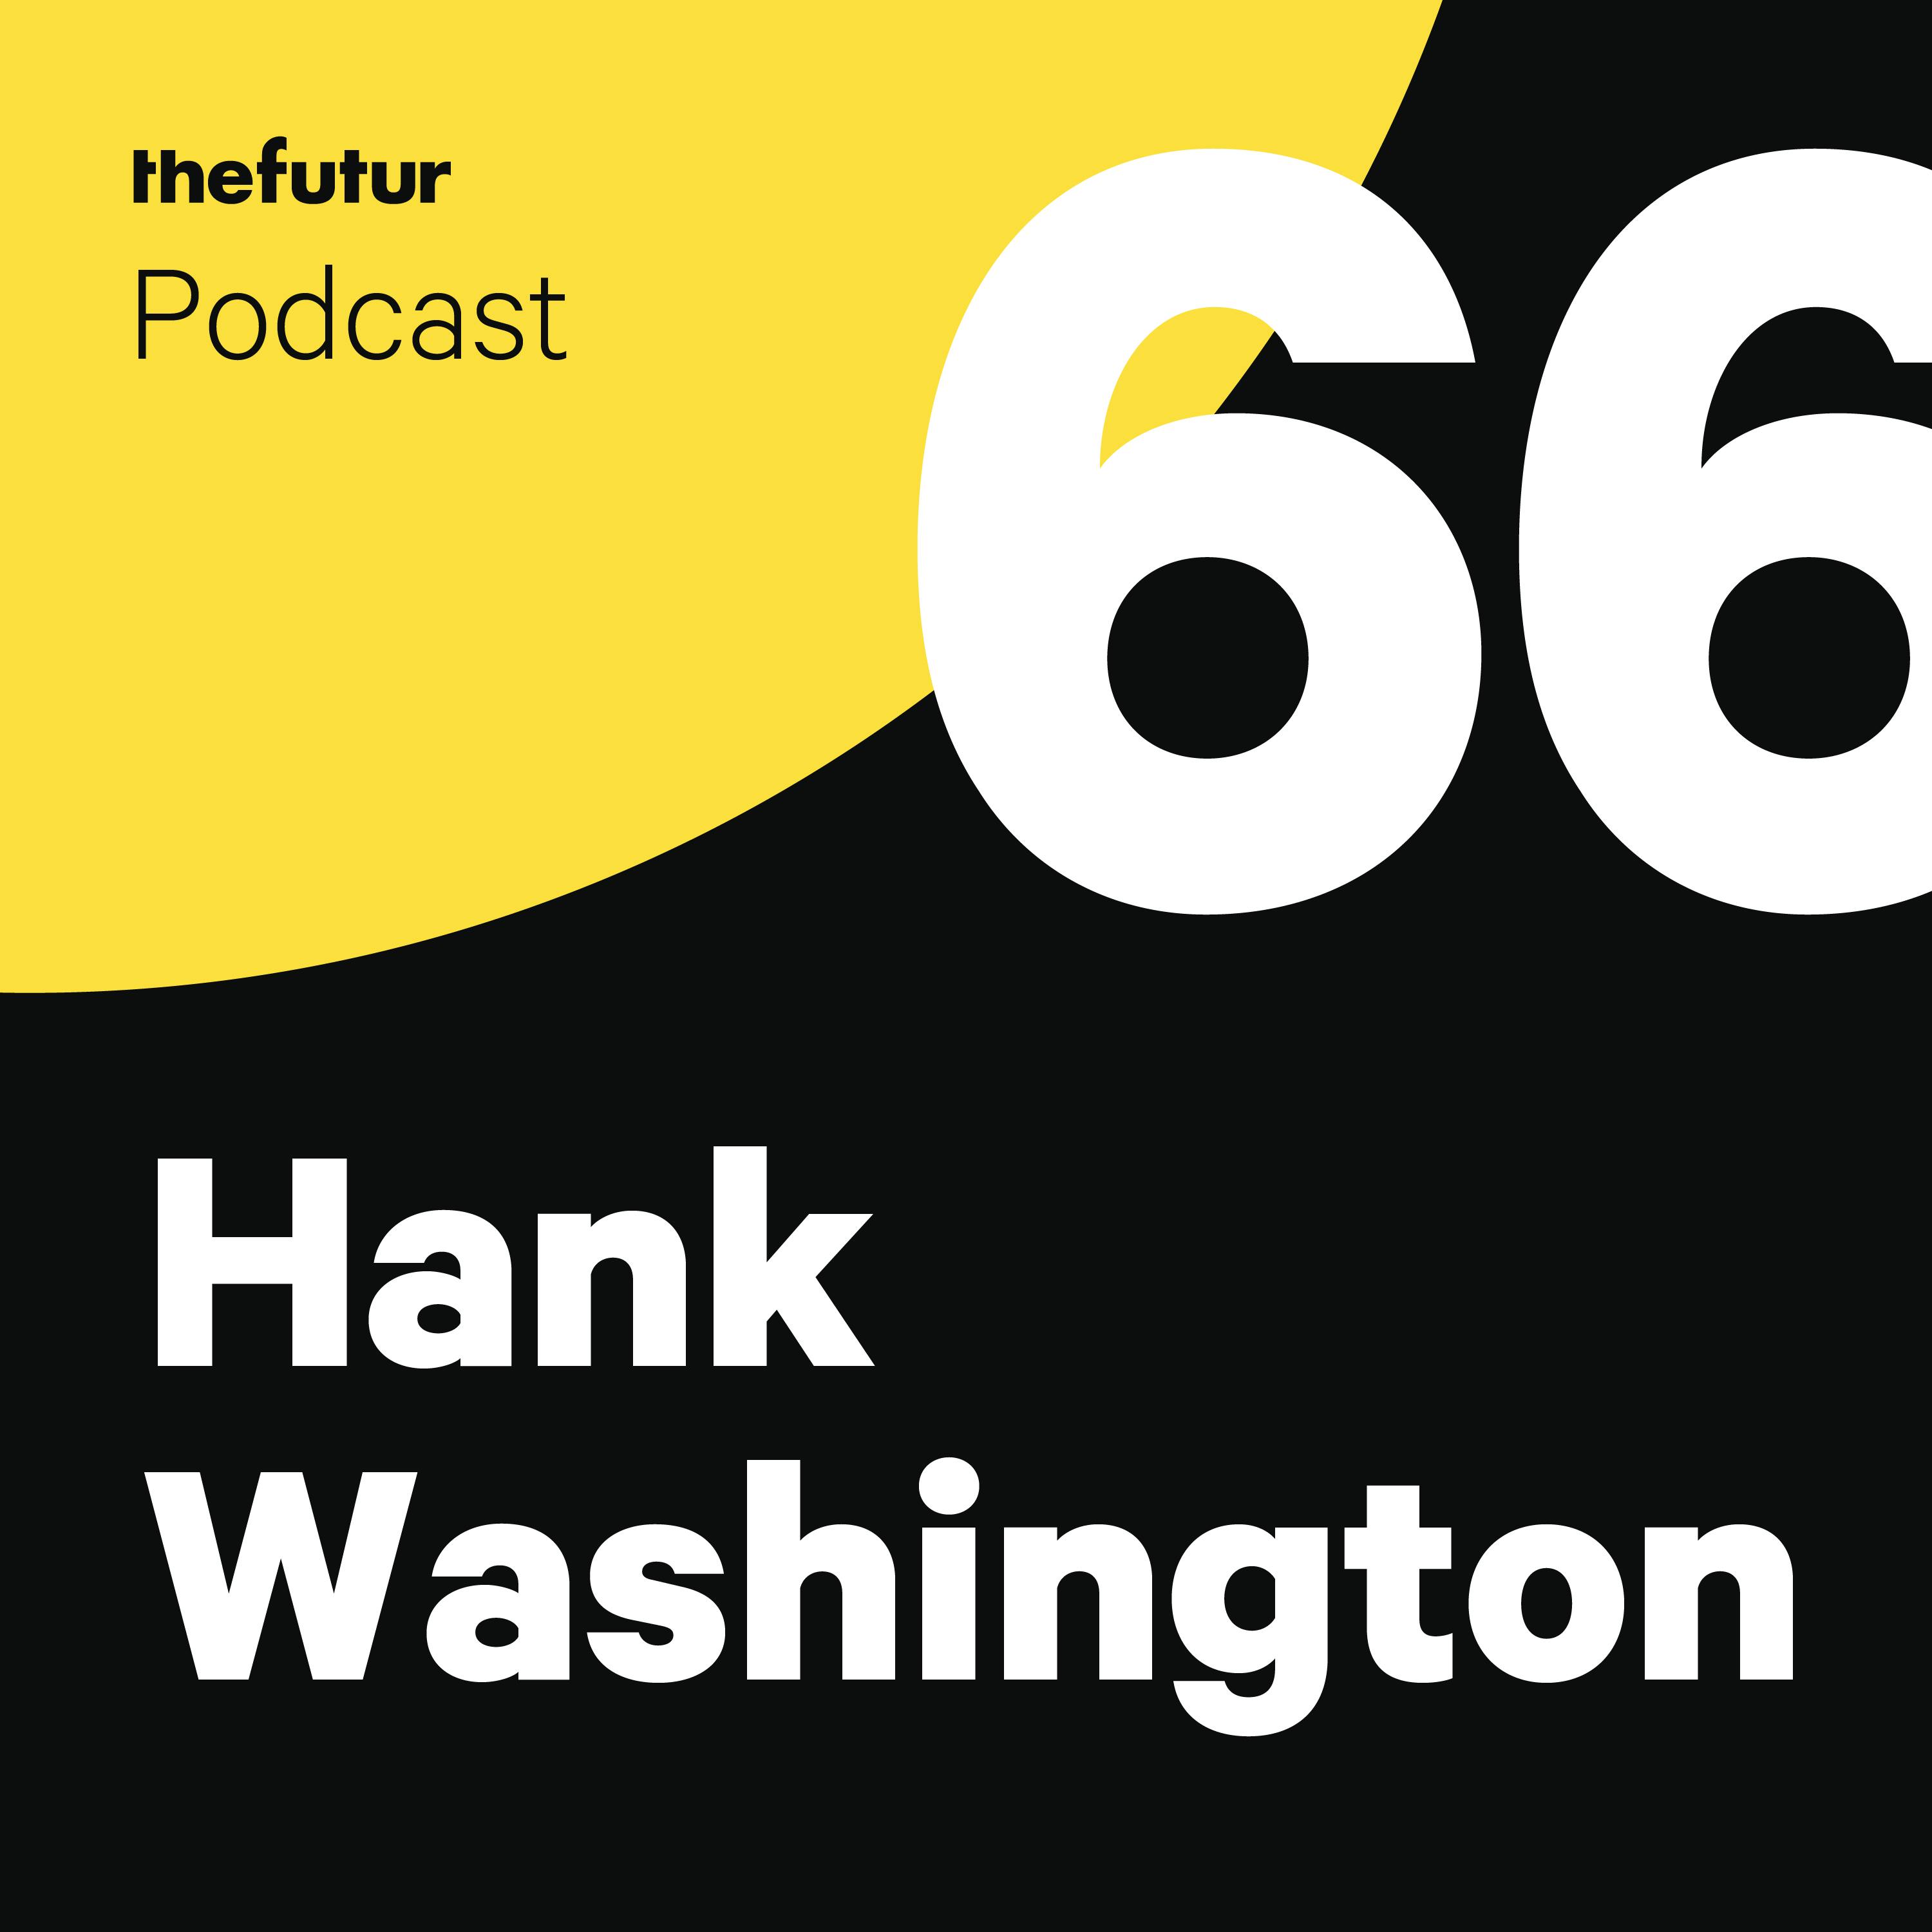 066 - The Difference Between Inclusion and Belonging — with Hank Washington